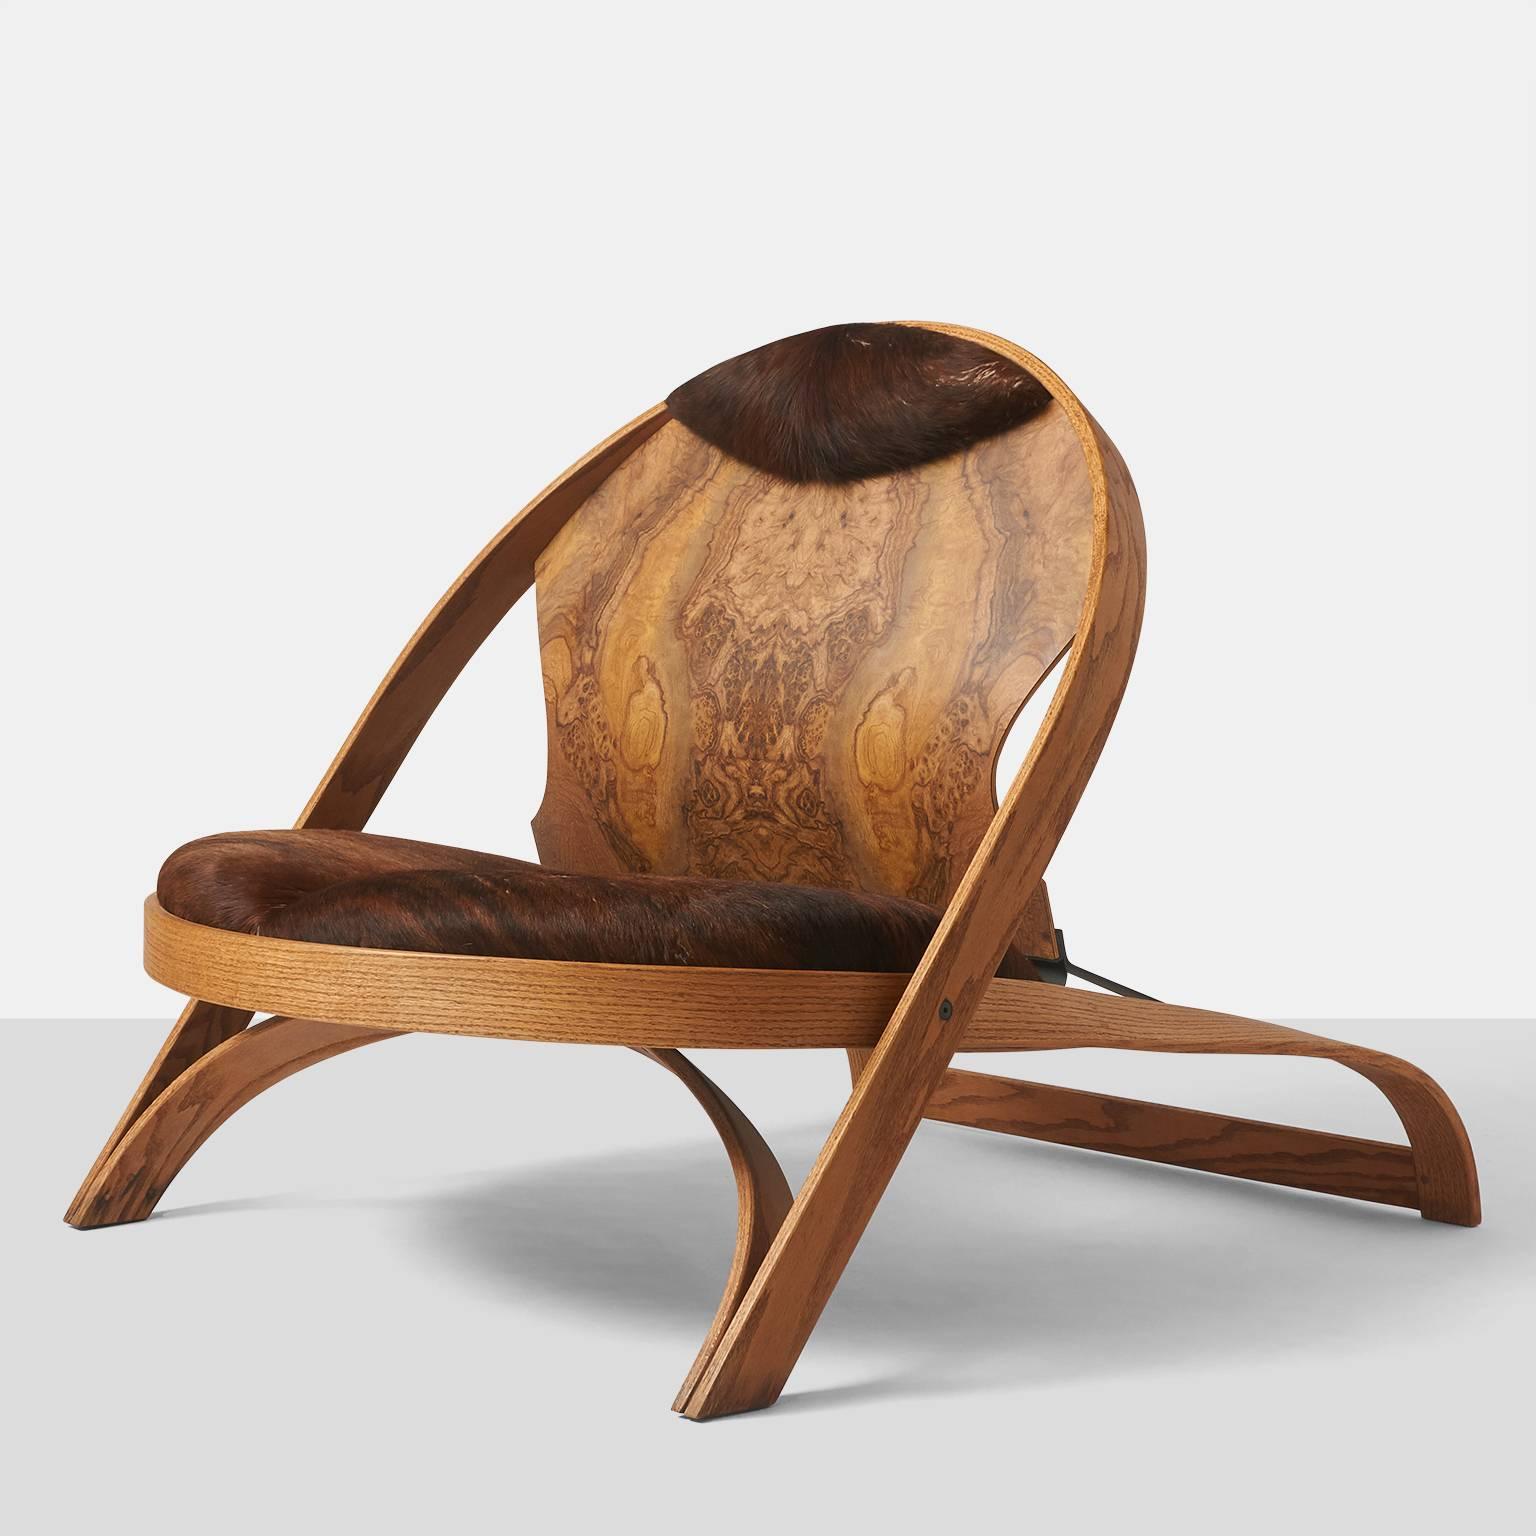 A limited edition chair by Richard Artschwager in oak with cowhide seat and headrest and a painted steel support on the backside.
Richard Artschwager, 1923-2013, is a renowned artist with shows from the Whitney Museum in New York to the Centre